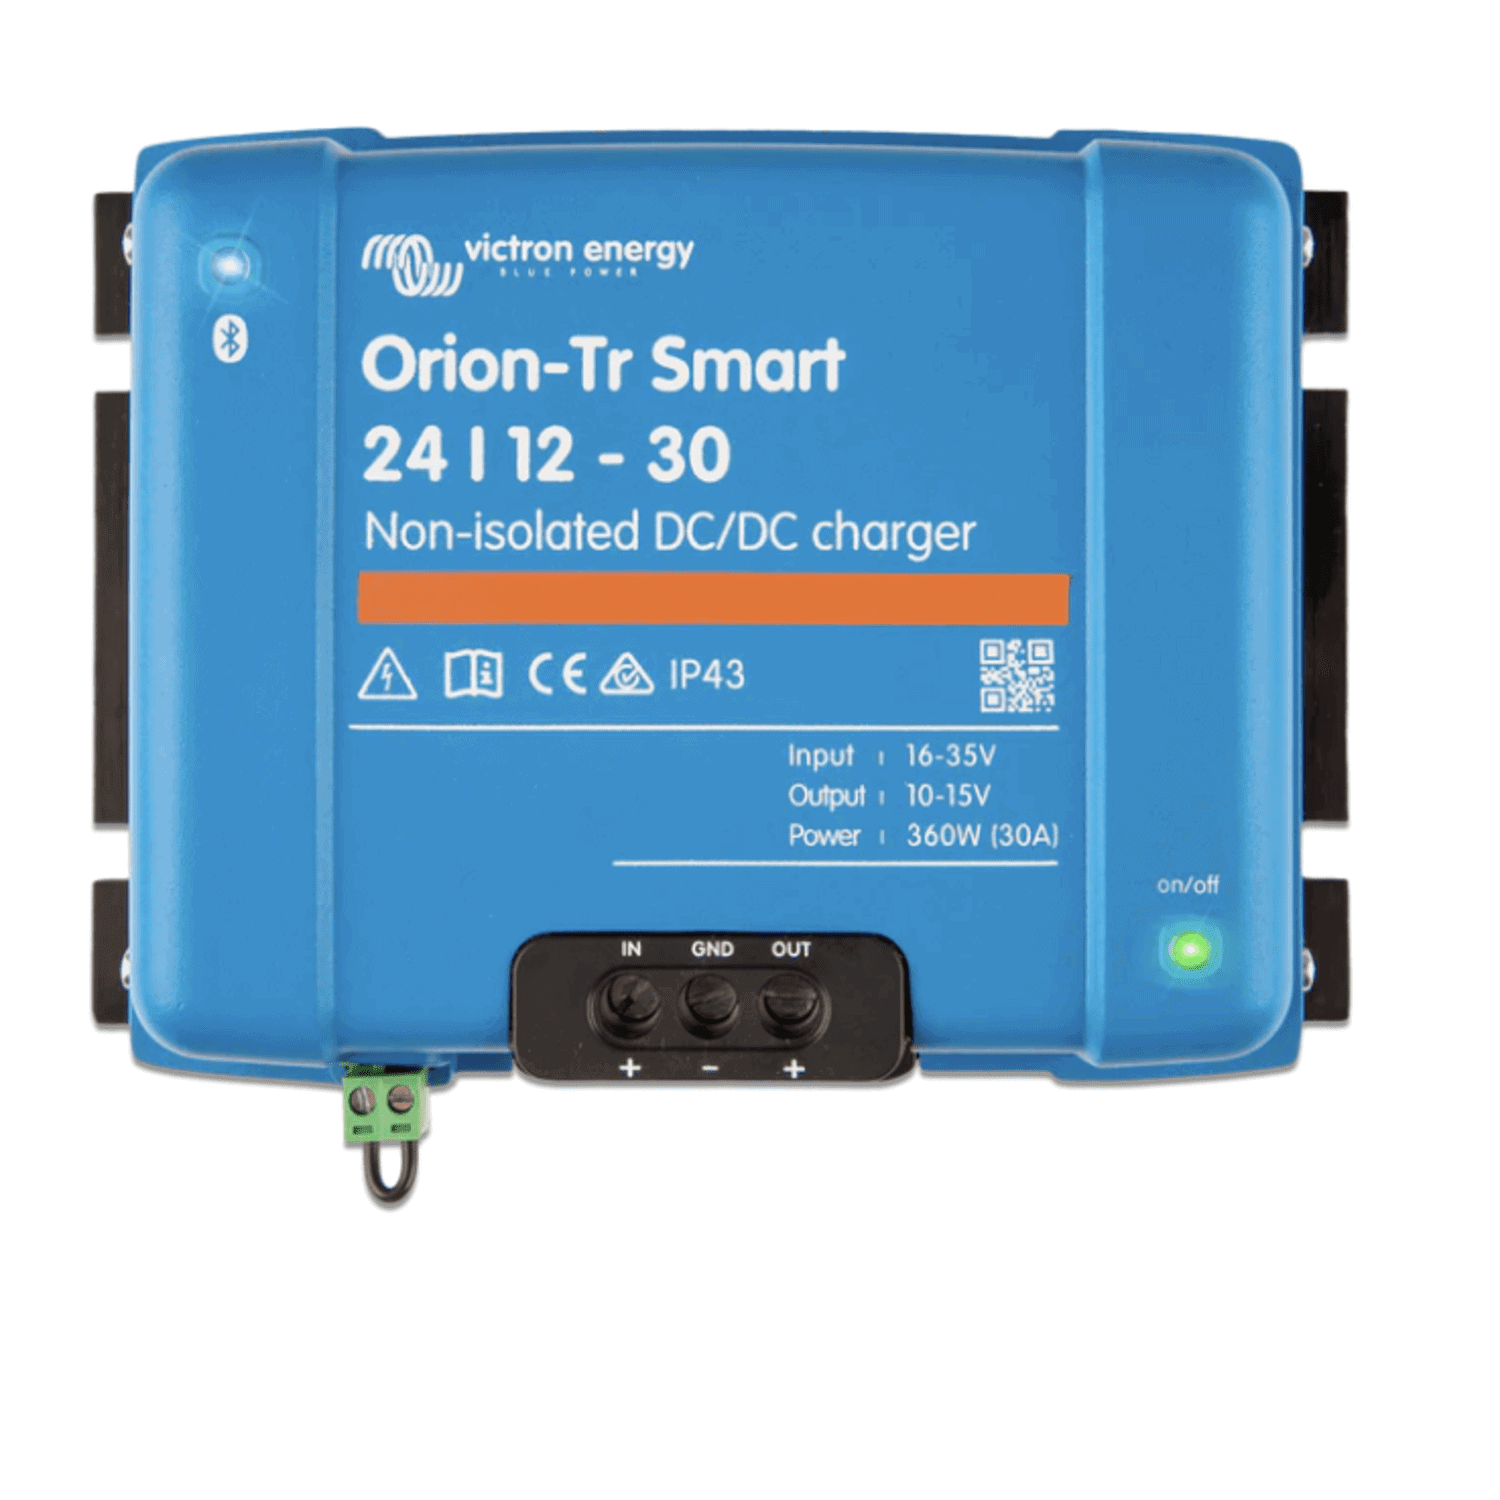 Orion-Tr Smart Non-Isolated 24/12V 30A DC to DC charger (LiFePO₄)